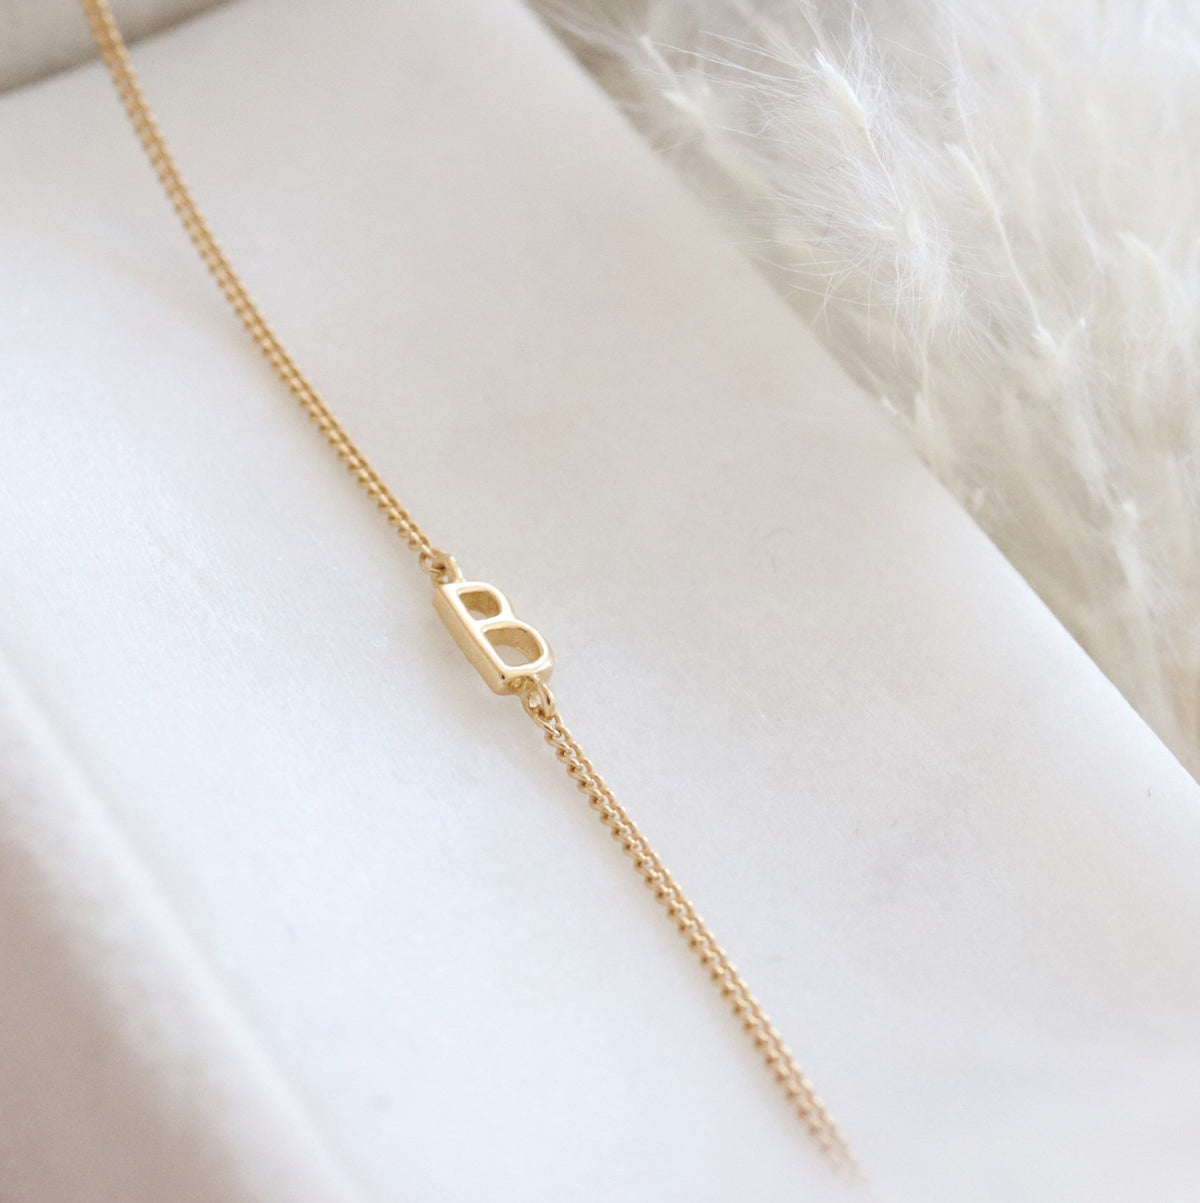 NOTABLE OFFSET INITIAL NECKLACE - B - GOLD - SO PRETTY CARA COTTER